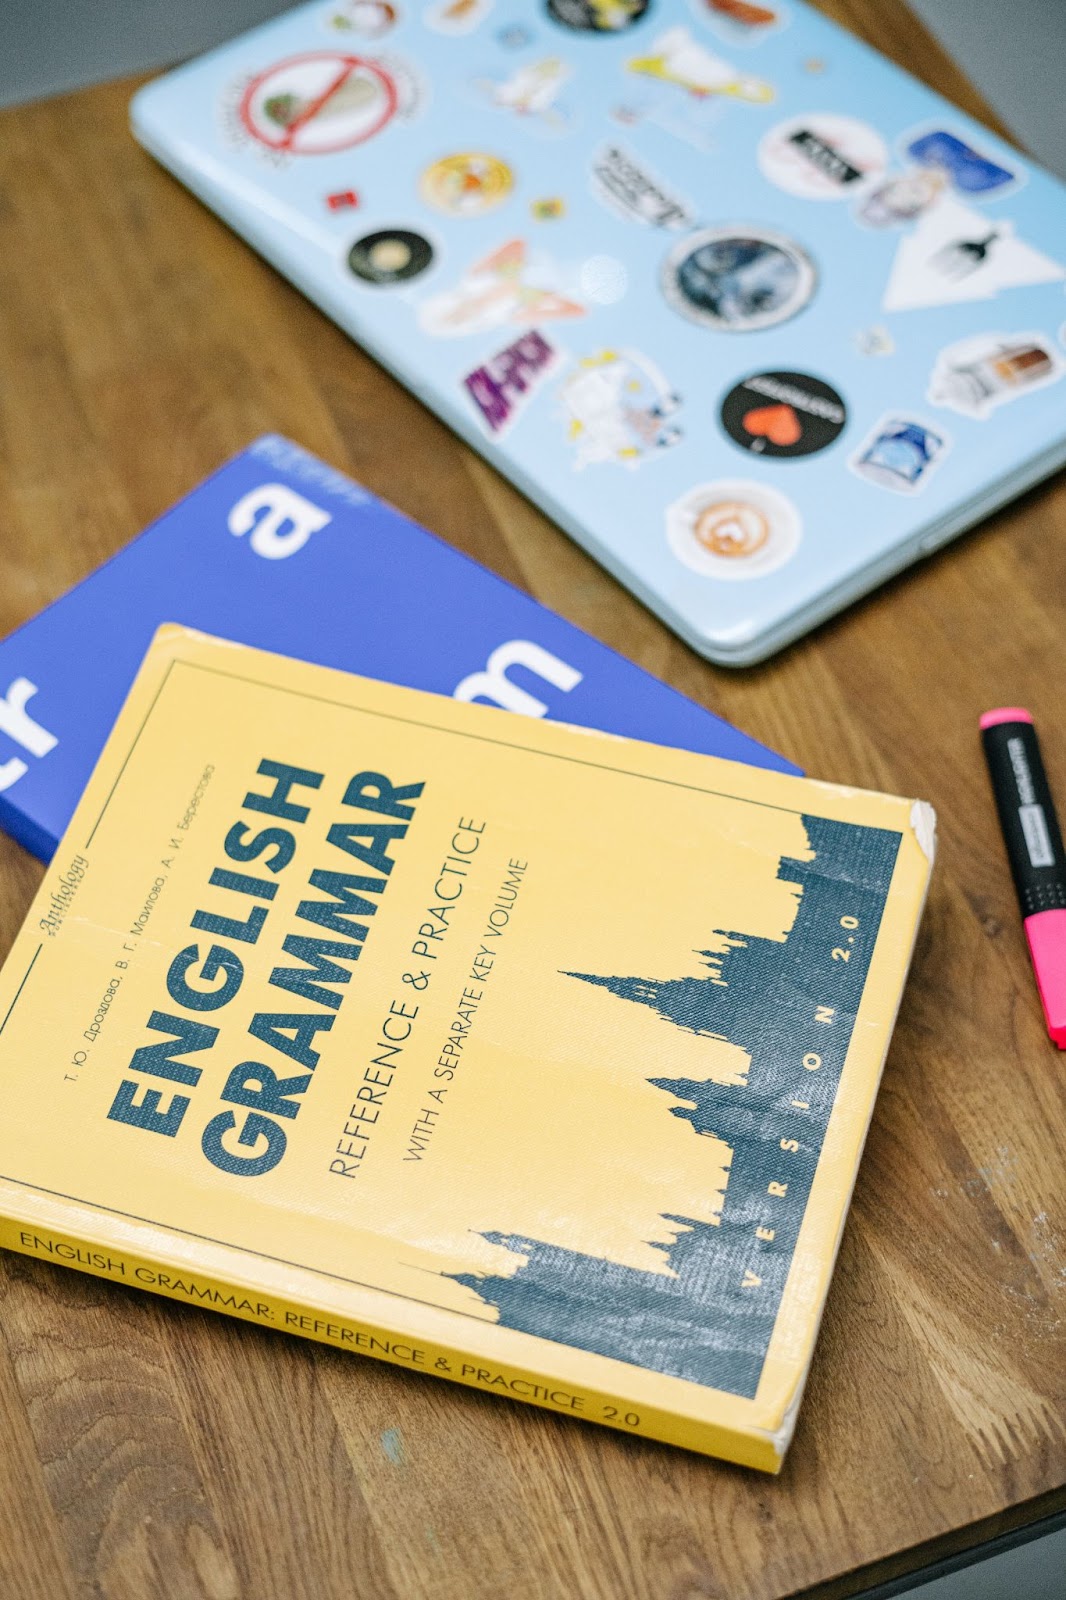 Some books and a laptop on a desk. The top book is called "English Grammar".